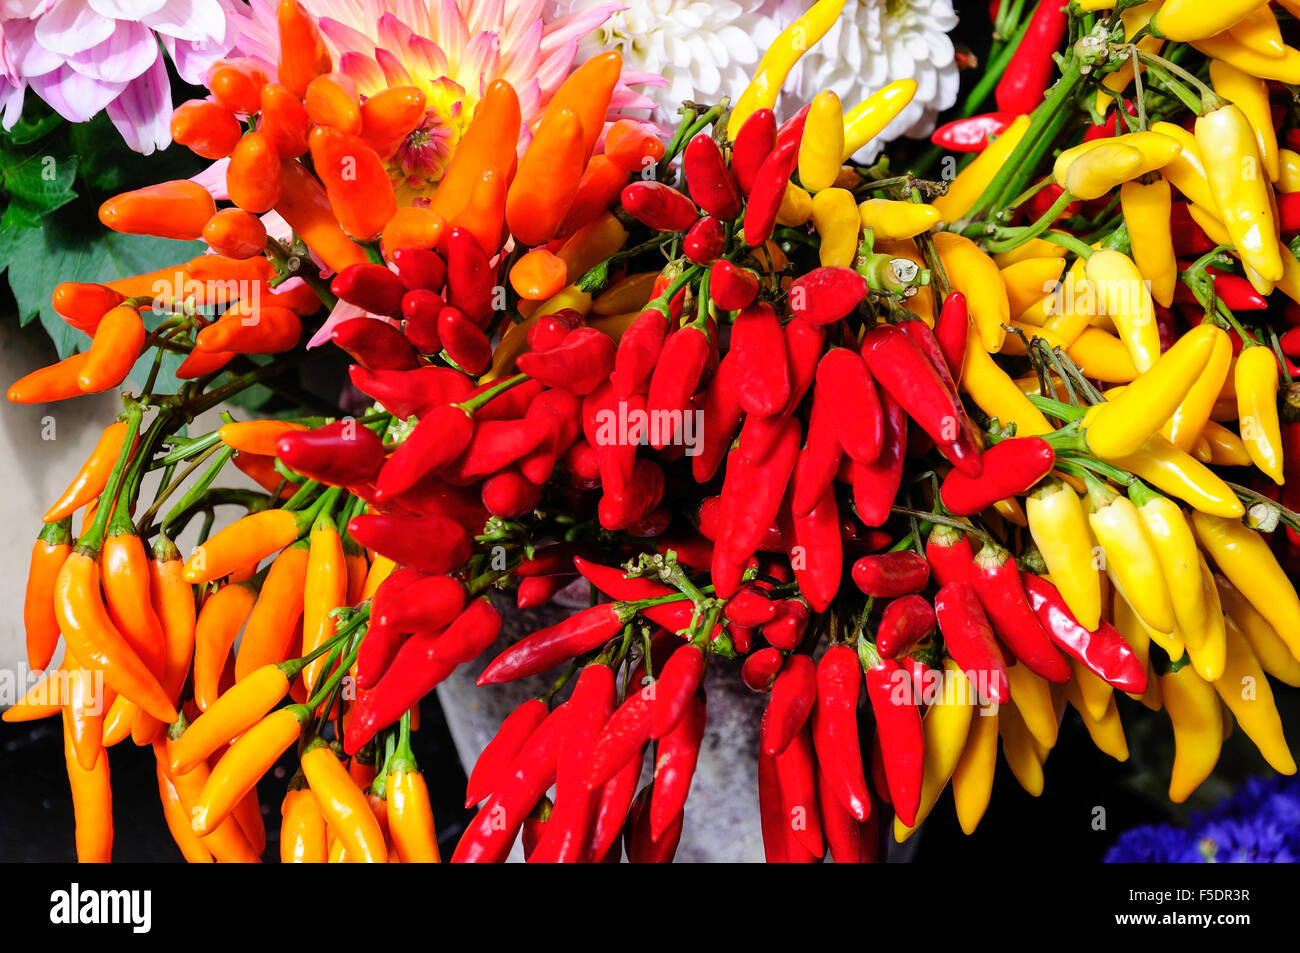 Colourful peppers in flower shop, Flask Flask Walk, Hampstead, London Borough of Camden, Greater London, England, United Kingdom Stock Photo